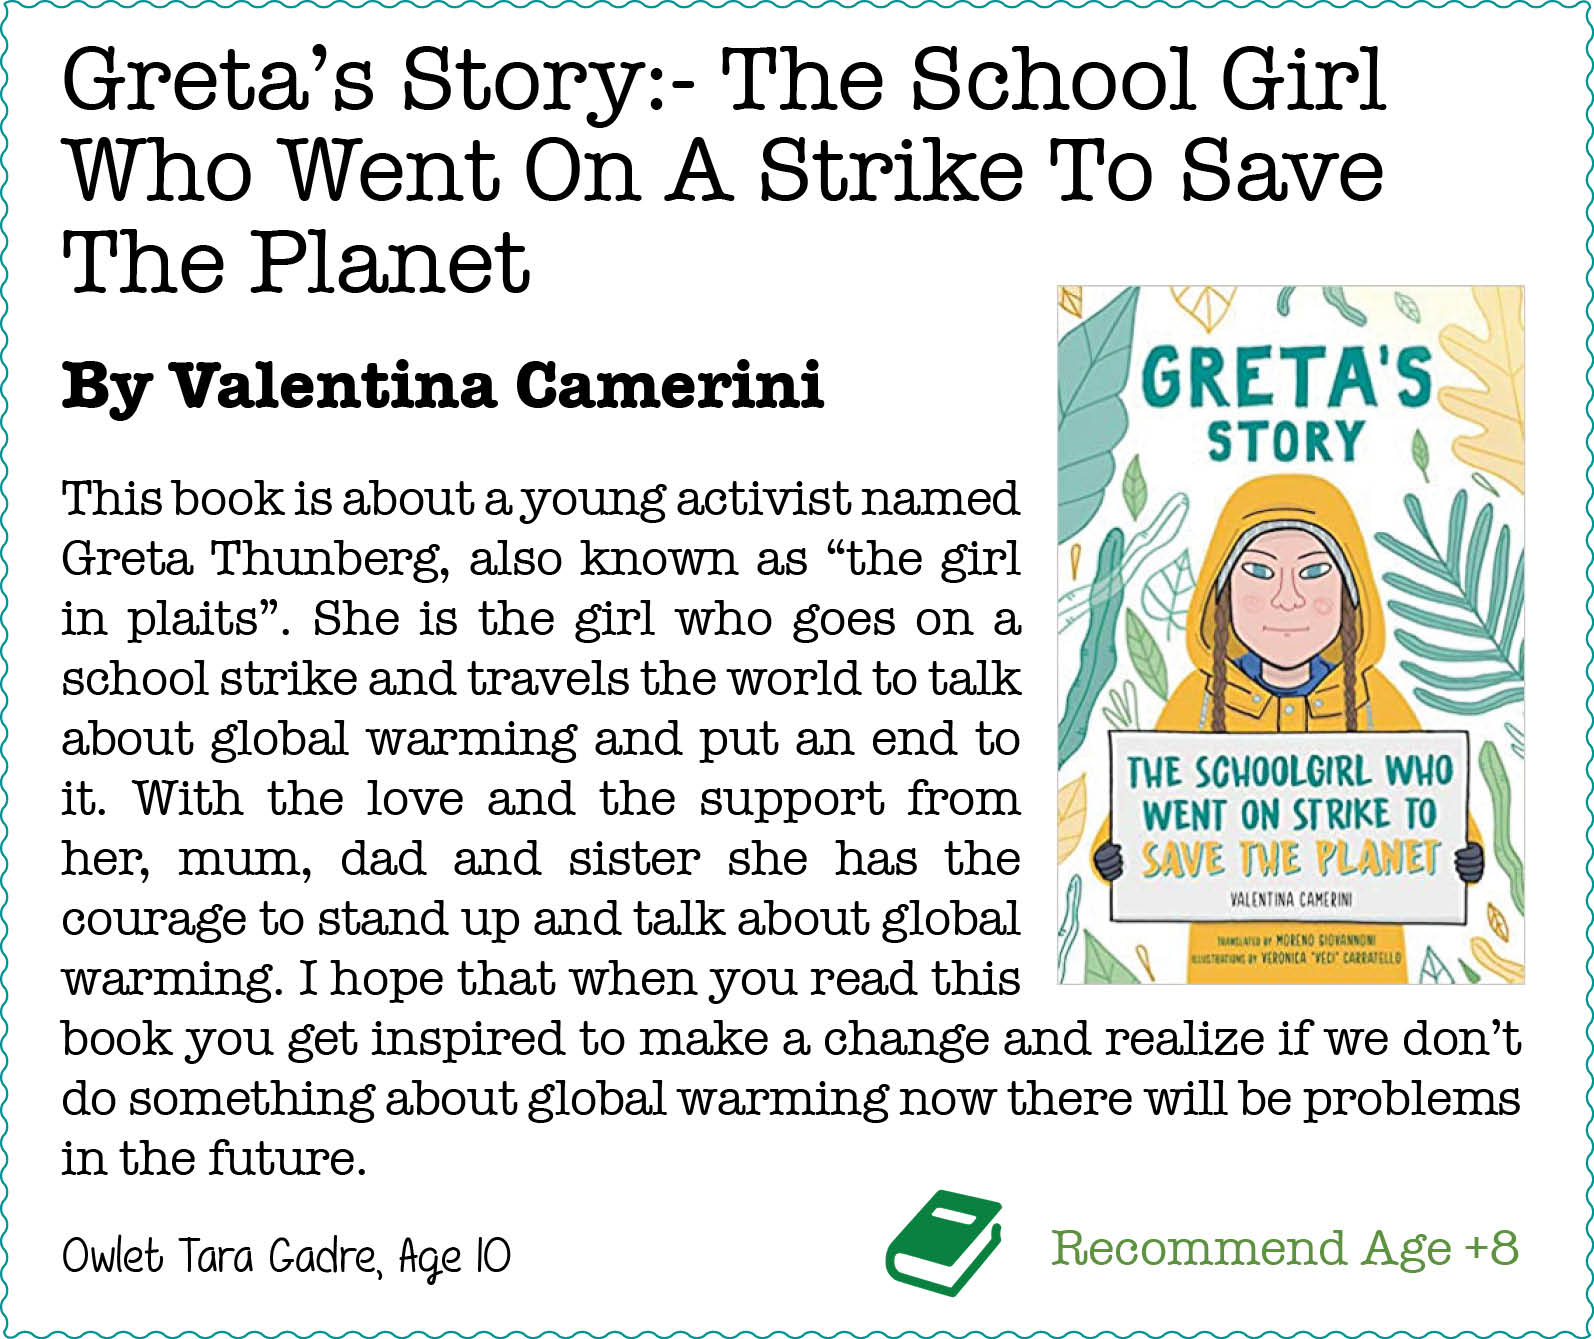 Greta’s Story:- The School Girl Who Went On A Strike To Save The Planet